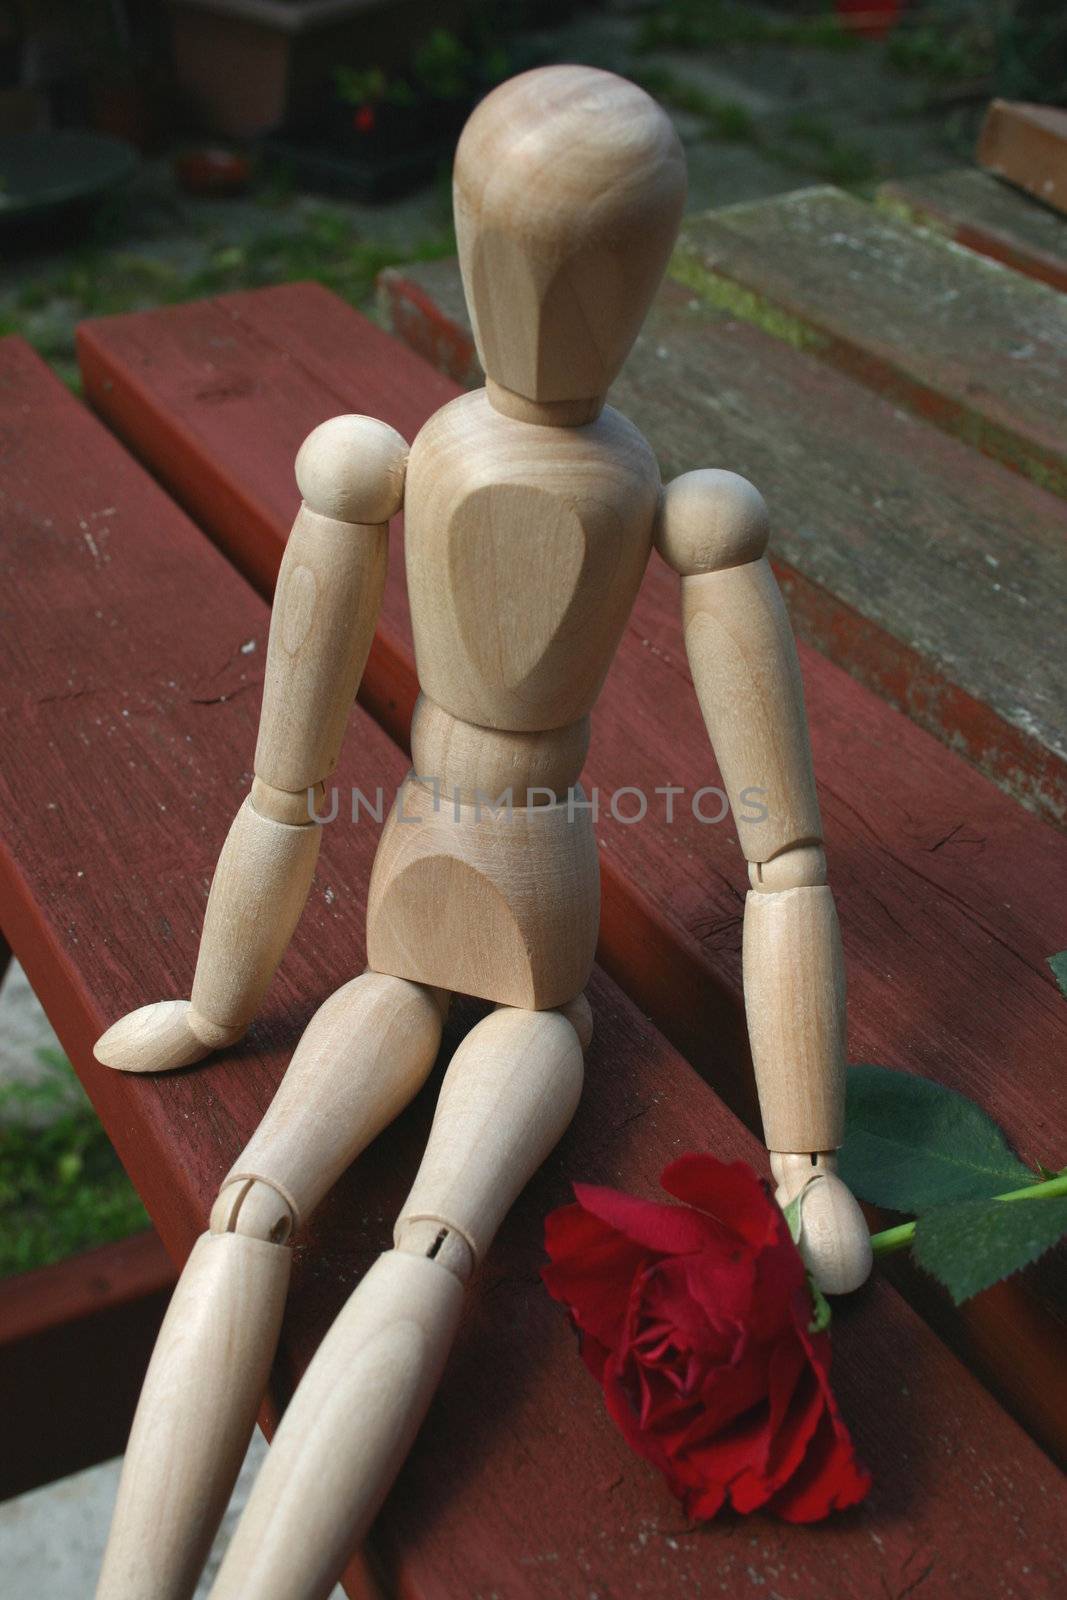 mannequin waiting to give his loved one a rose on valentines day